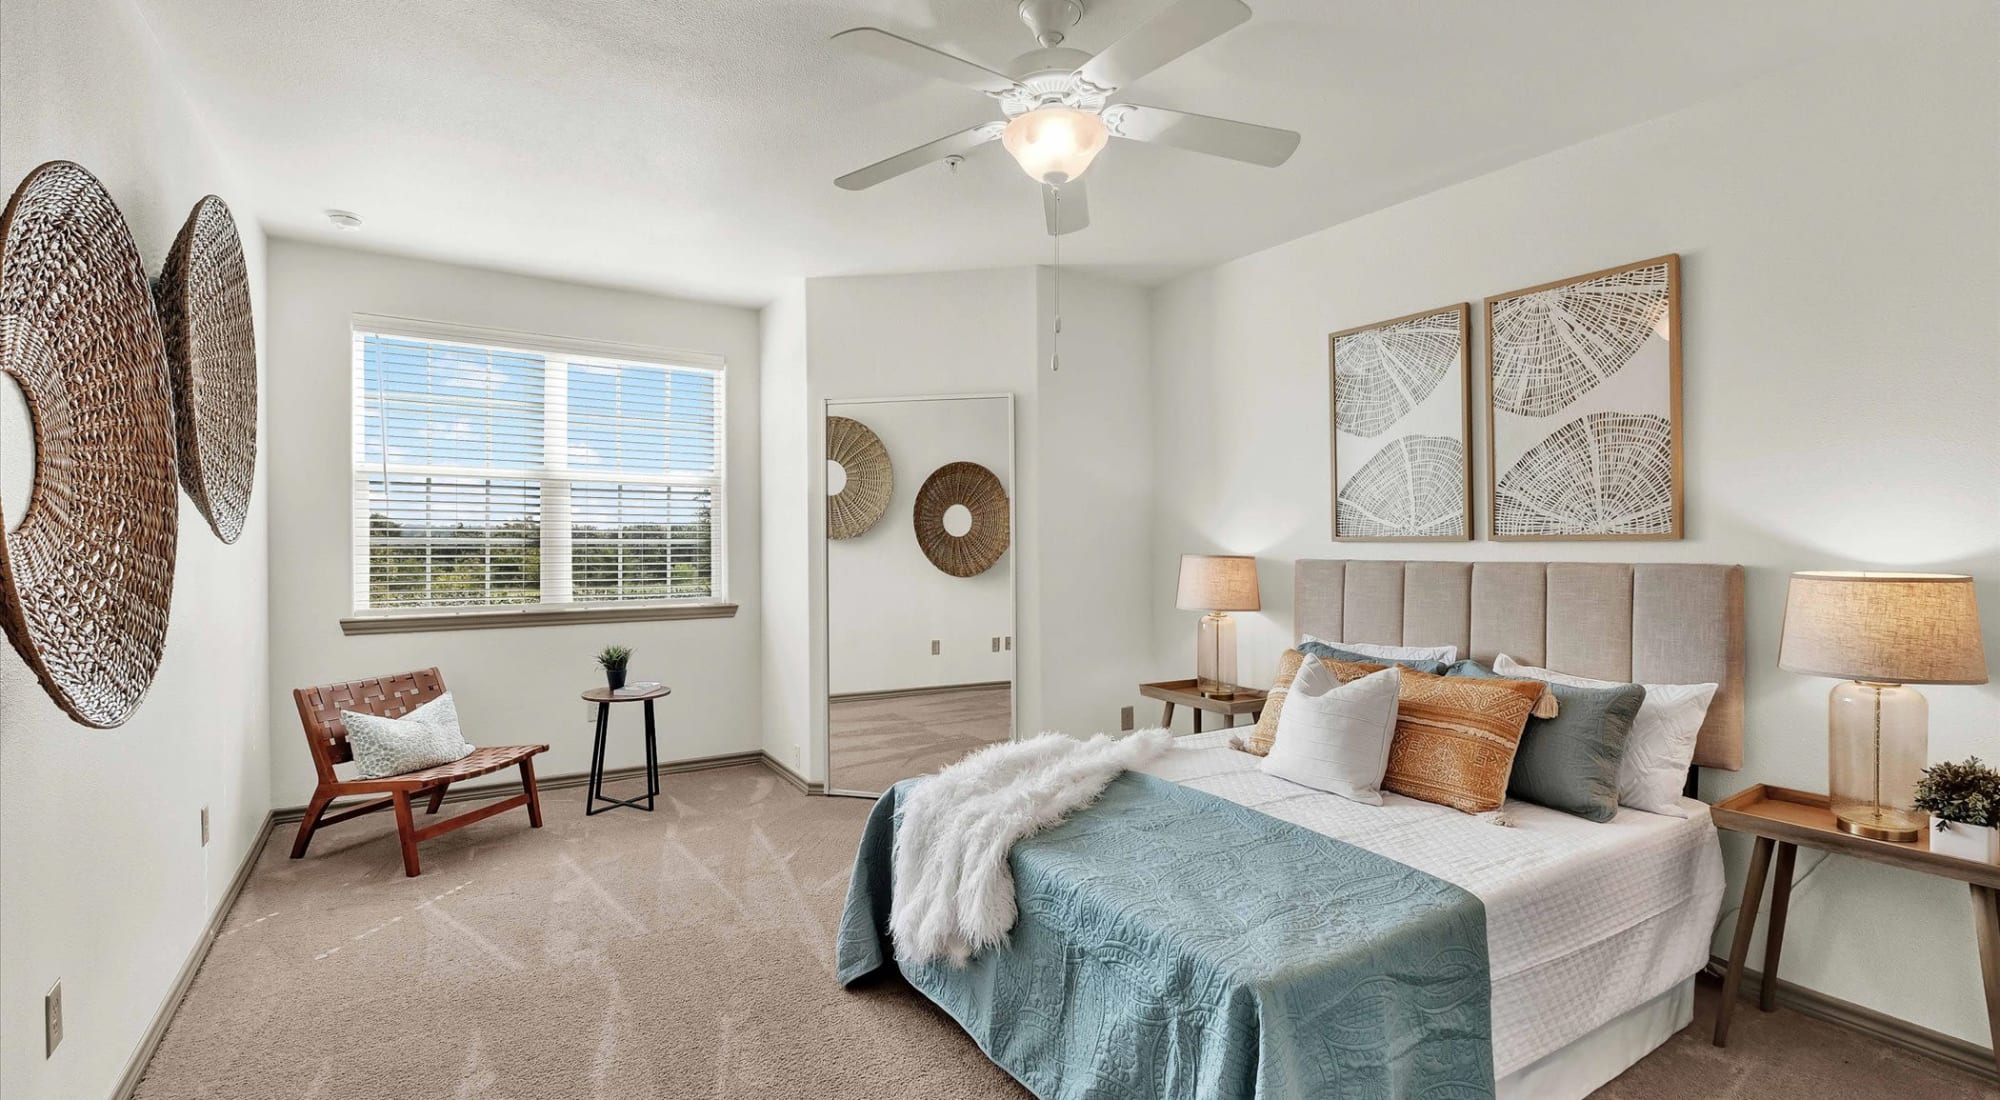 Spacious bedroom with ceiling fan at Villas at Westover Hills